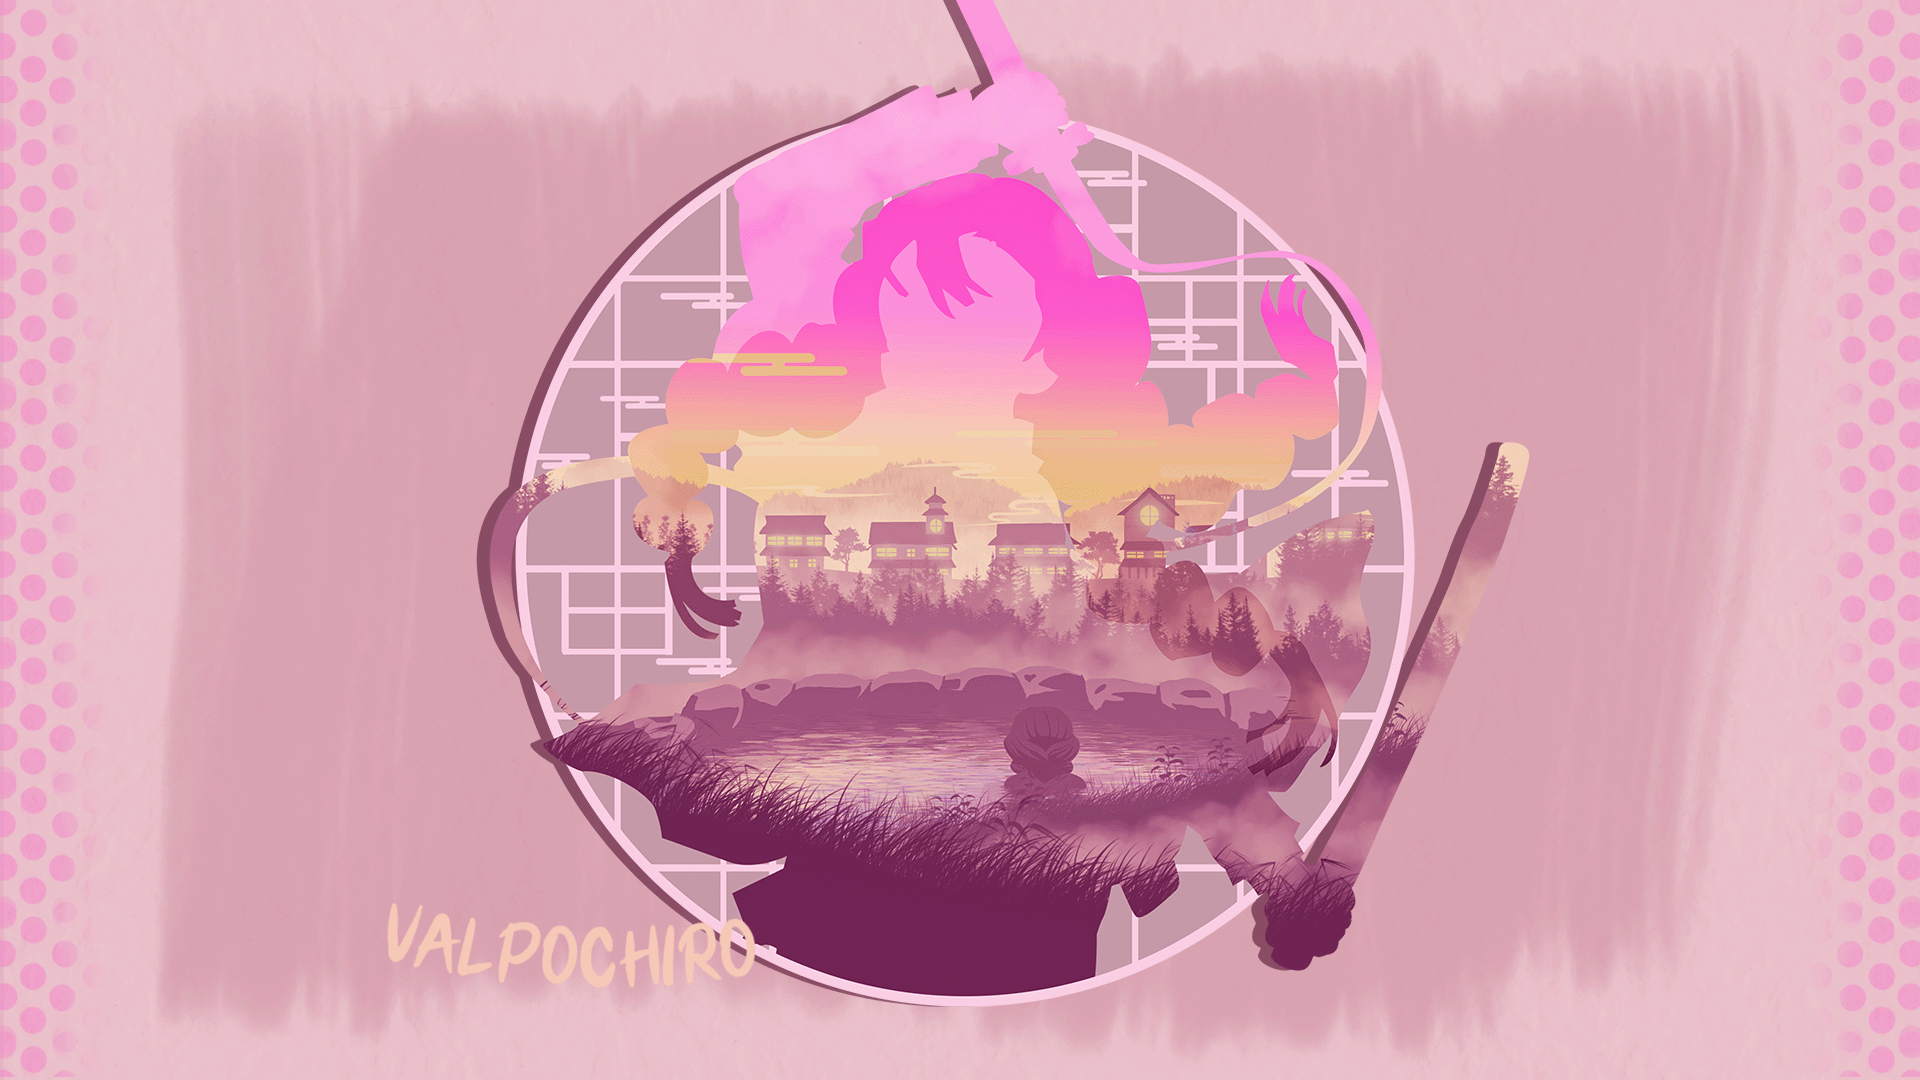 A pink and purple circle with a character from the game Valpochir. - Illustration